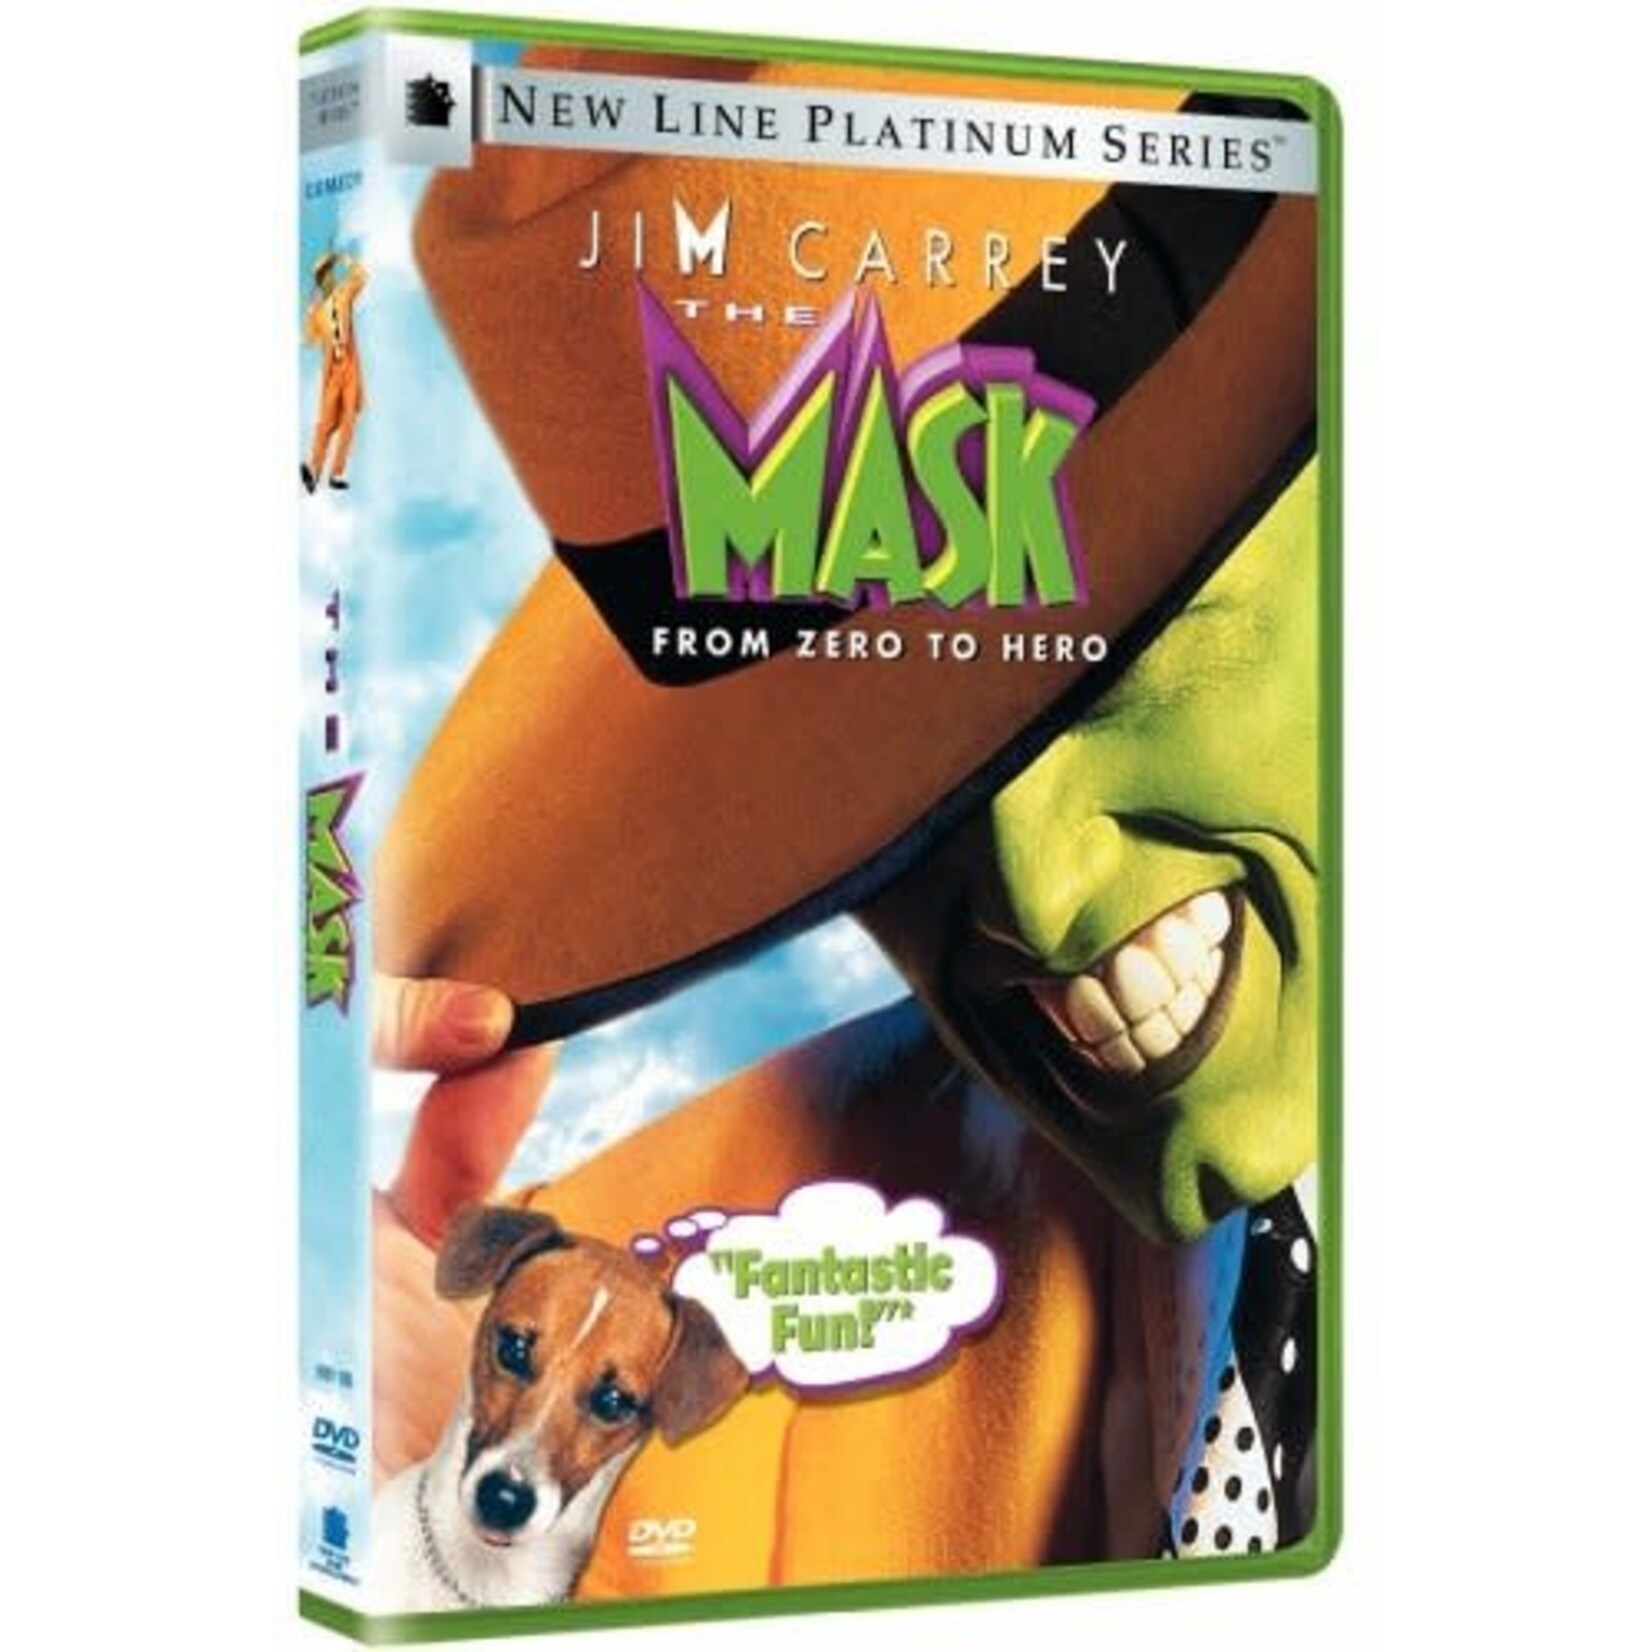 Mask (1994) [USED DVD]